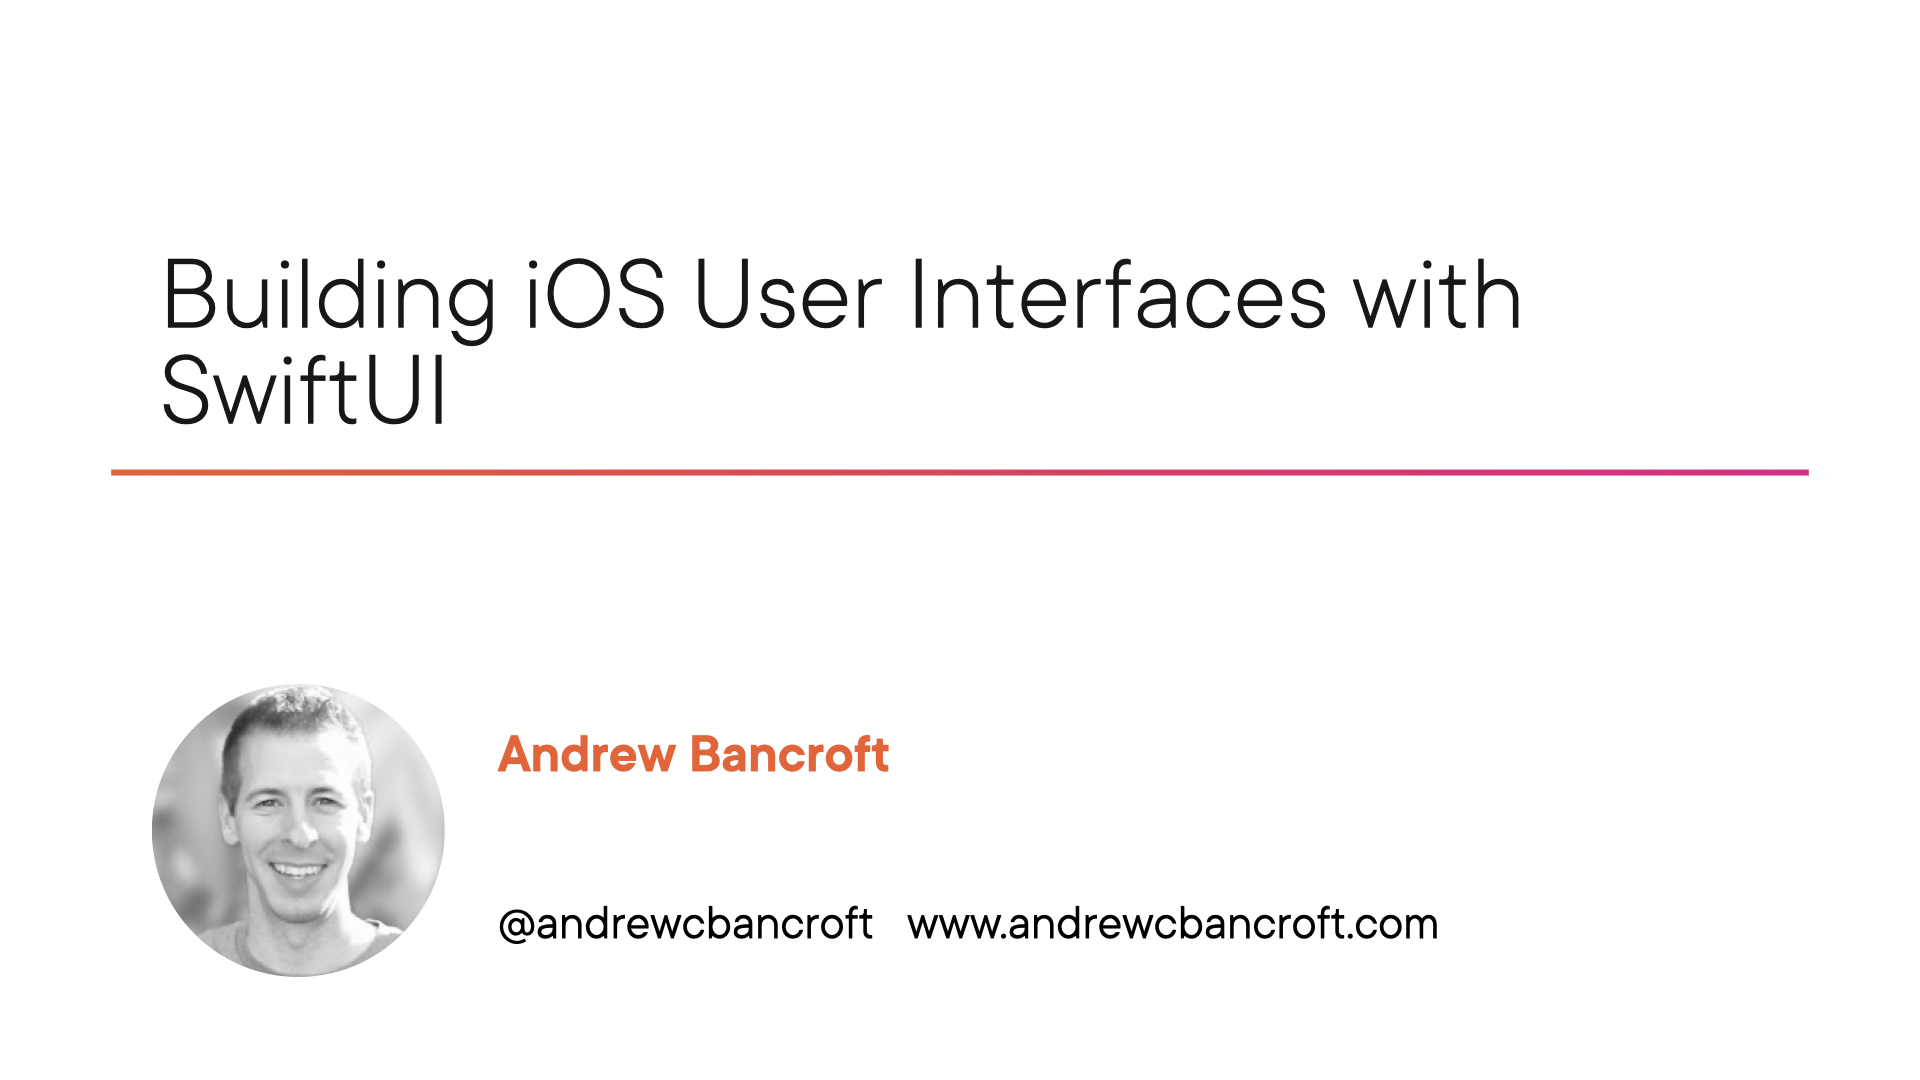 Building iOS User Interfaces with SwiftUI